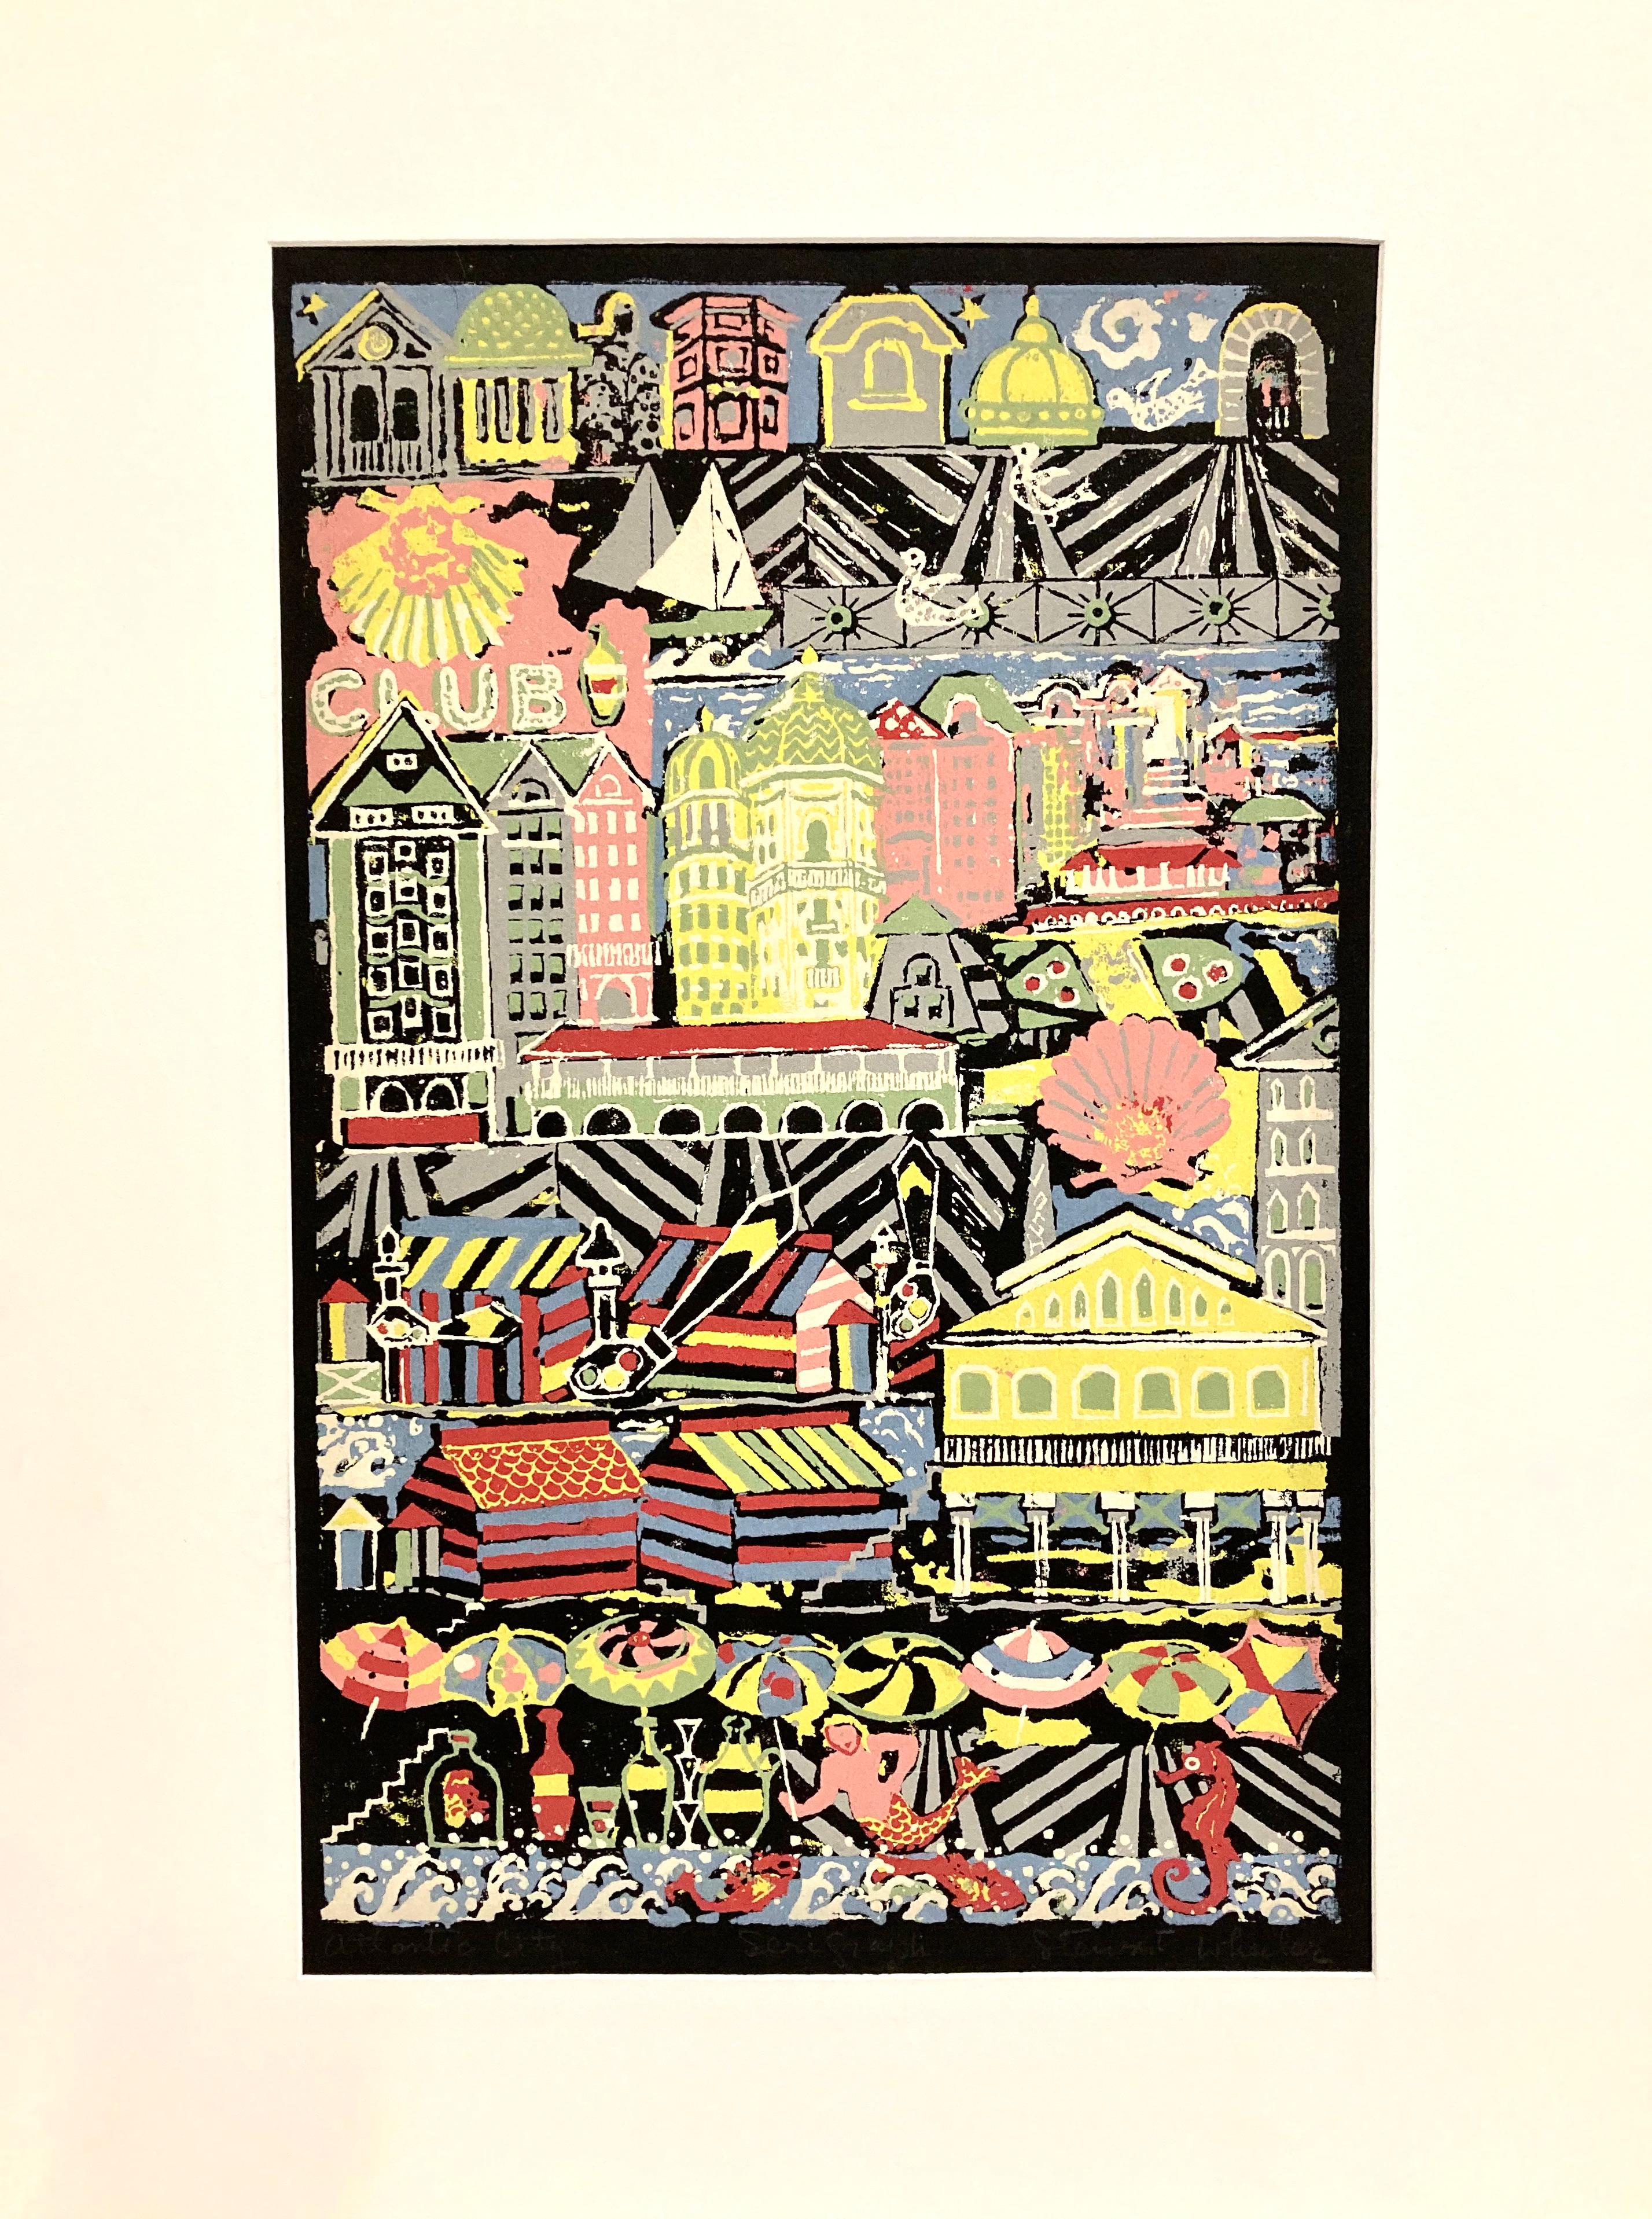 The little that is know about the painter and printmaker Stewart Wheeler indicates that most of his career was spent in Philadelphia, Pennsylvania. And makes Atlantic City, New Jersey, a likely spot for a beach vacation as it is more or less a